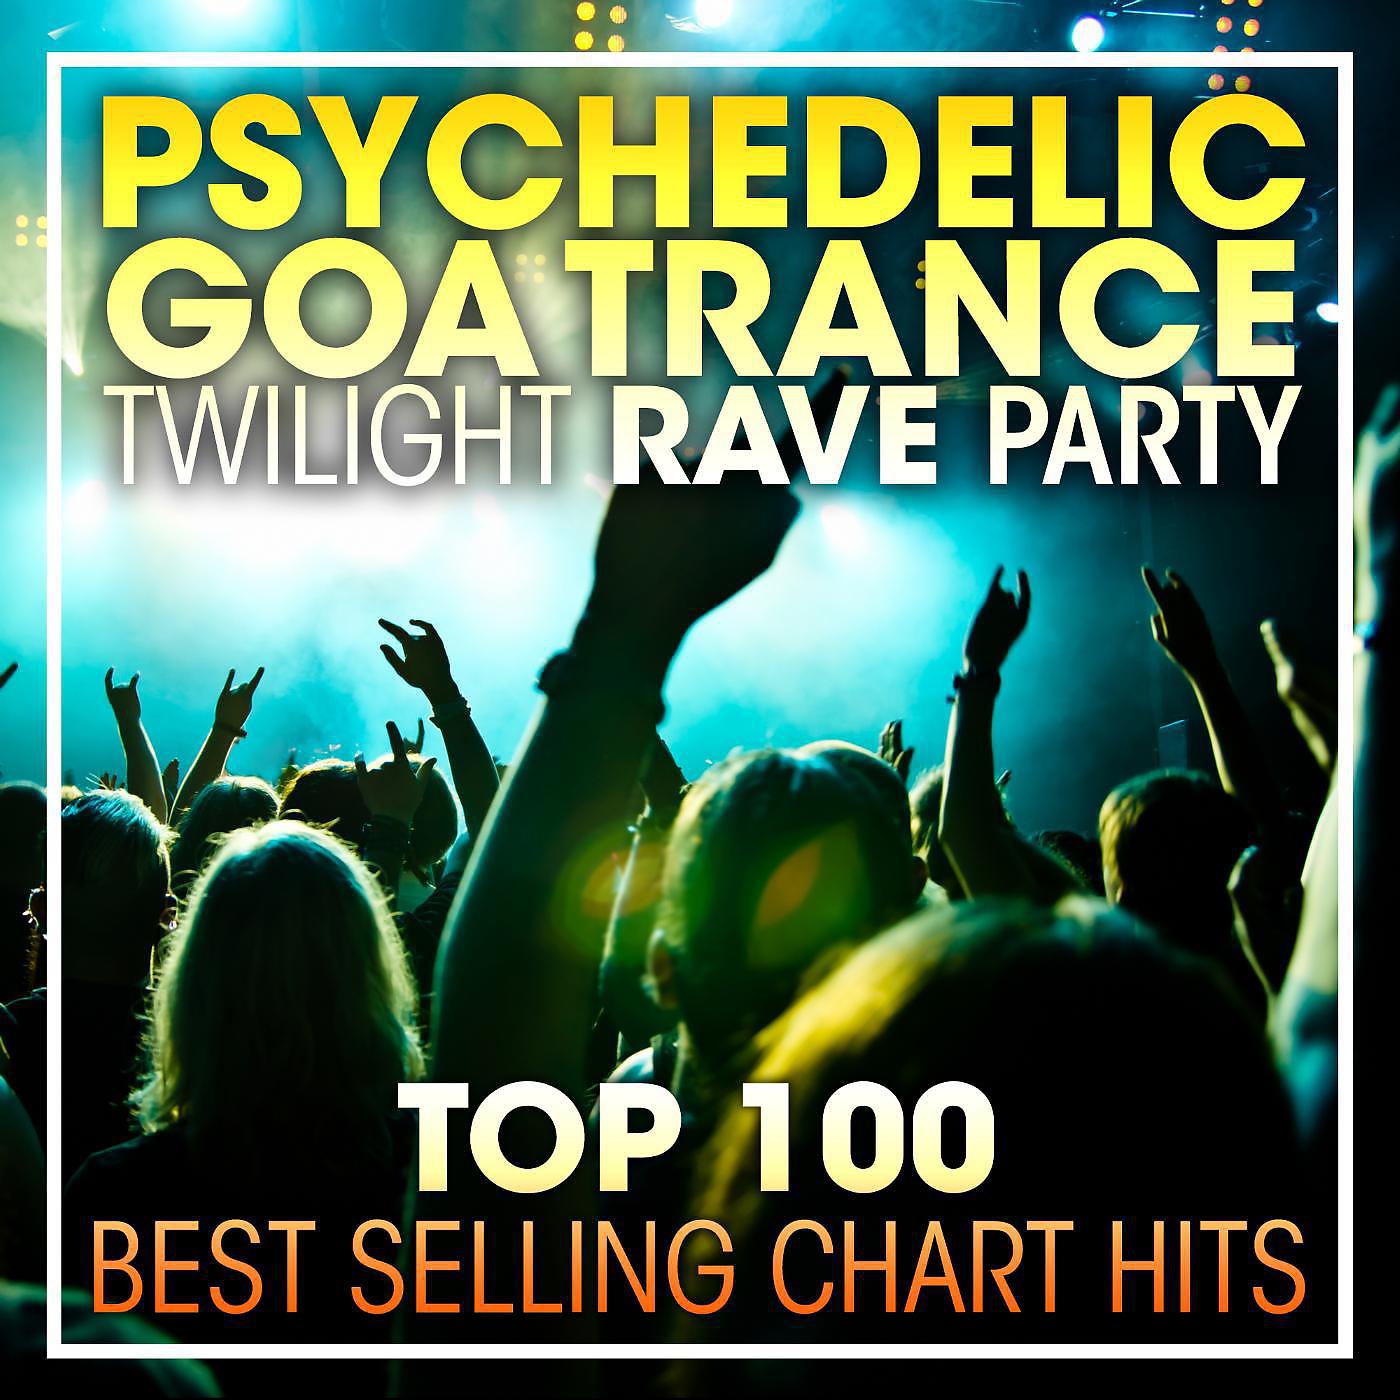 Постер альбома Psychedelic Goa Trance Twilight Rave Party Top 100 Best Selling Chart Hits + DJ Mix